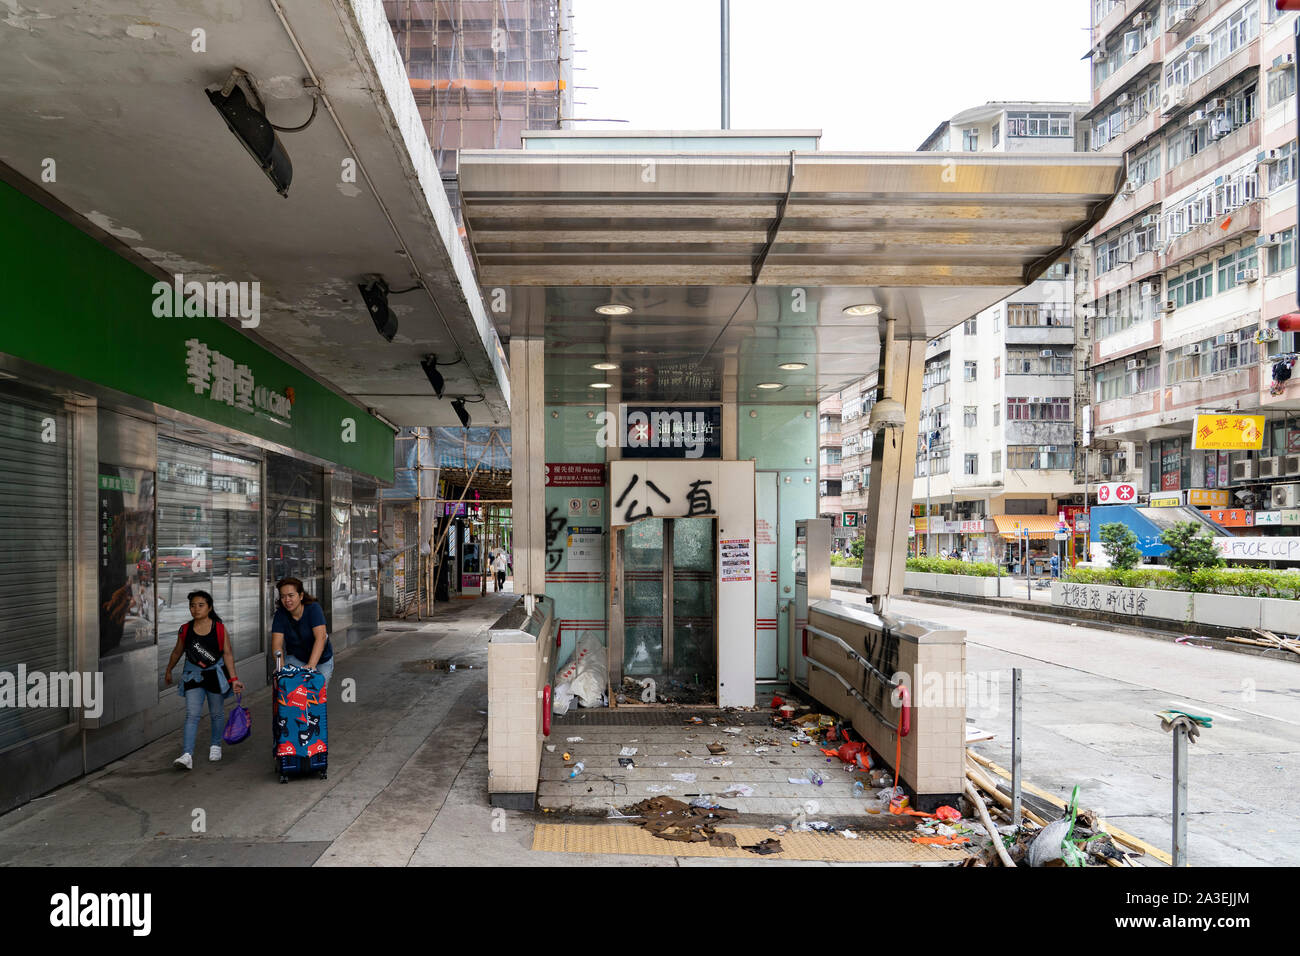 Kowloon, Hong Kong, China,. 7 October, 2019. After a night of violent confrontations between police and pro-democracy protestors in MongKok and YauMaTei in Kowloon, many MTR railway stations and what are thought to be pro-Beijing business franchises were vandalised. Yaumatei MTR station vandalised. Stock Photo